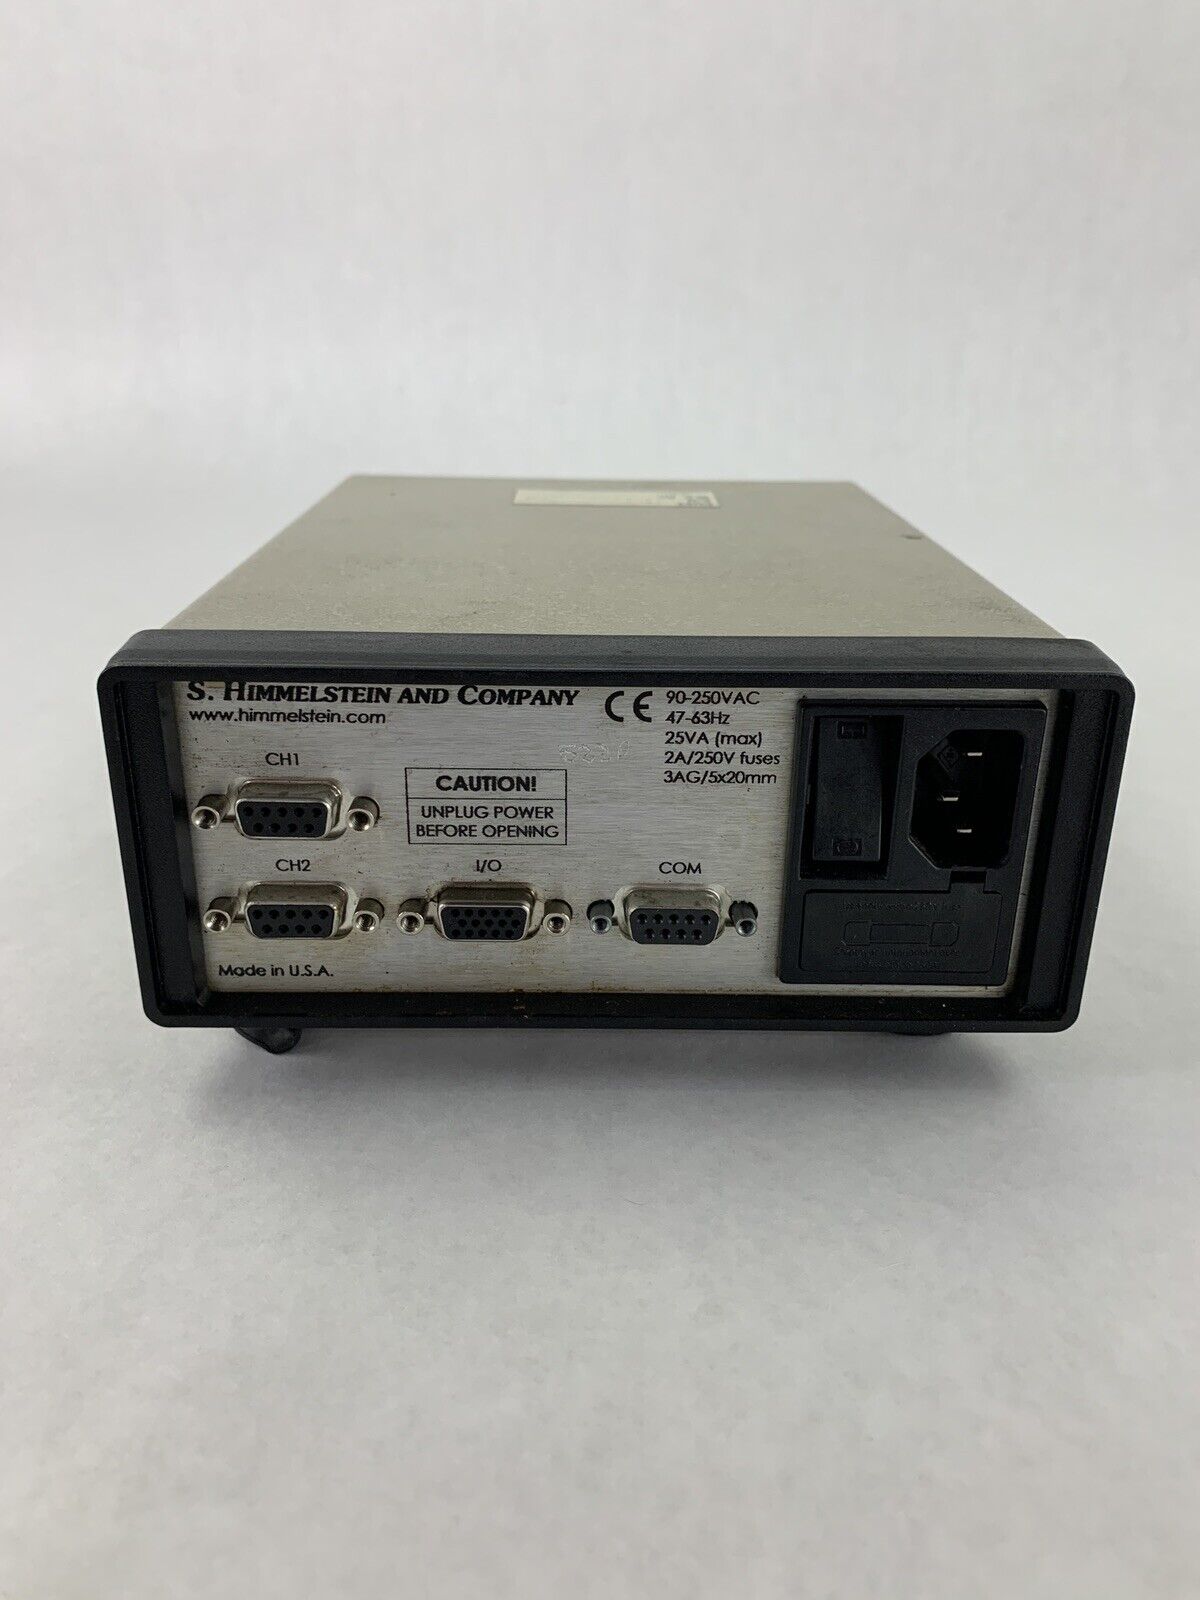 S. Himmelstein and Company 700 Series Transducer Signal Conditioner Power Tested